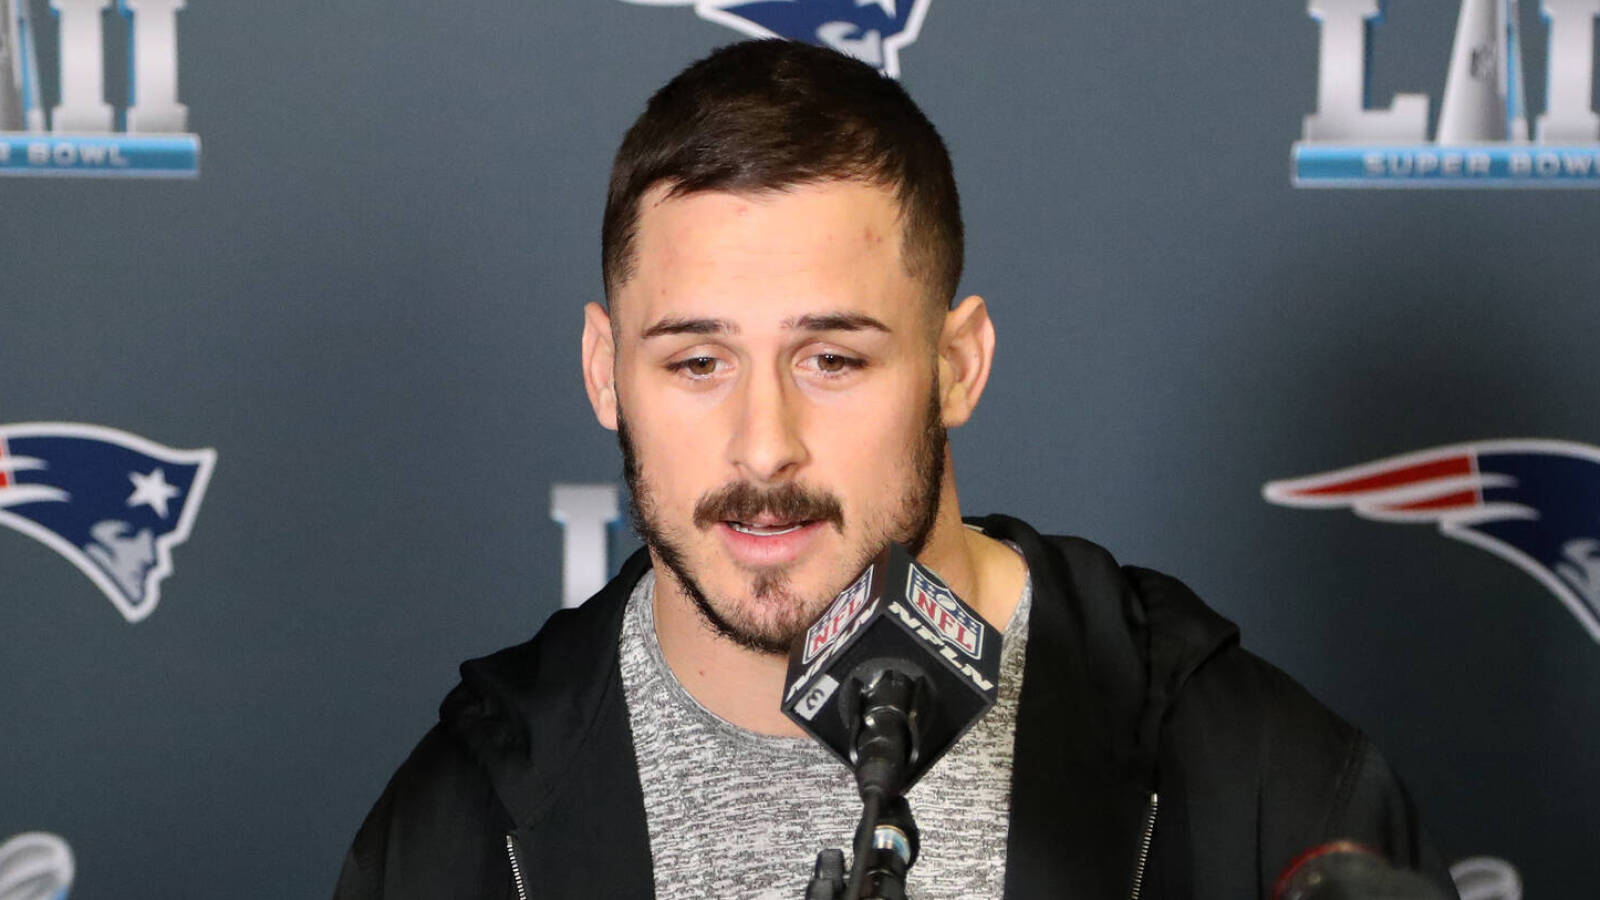 Danny Amendola retiring from the NFL after 13 seasons